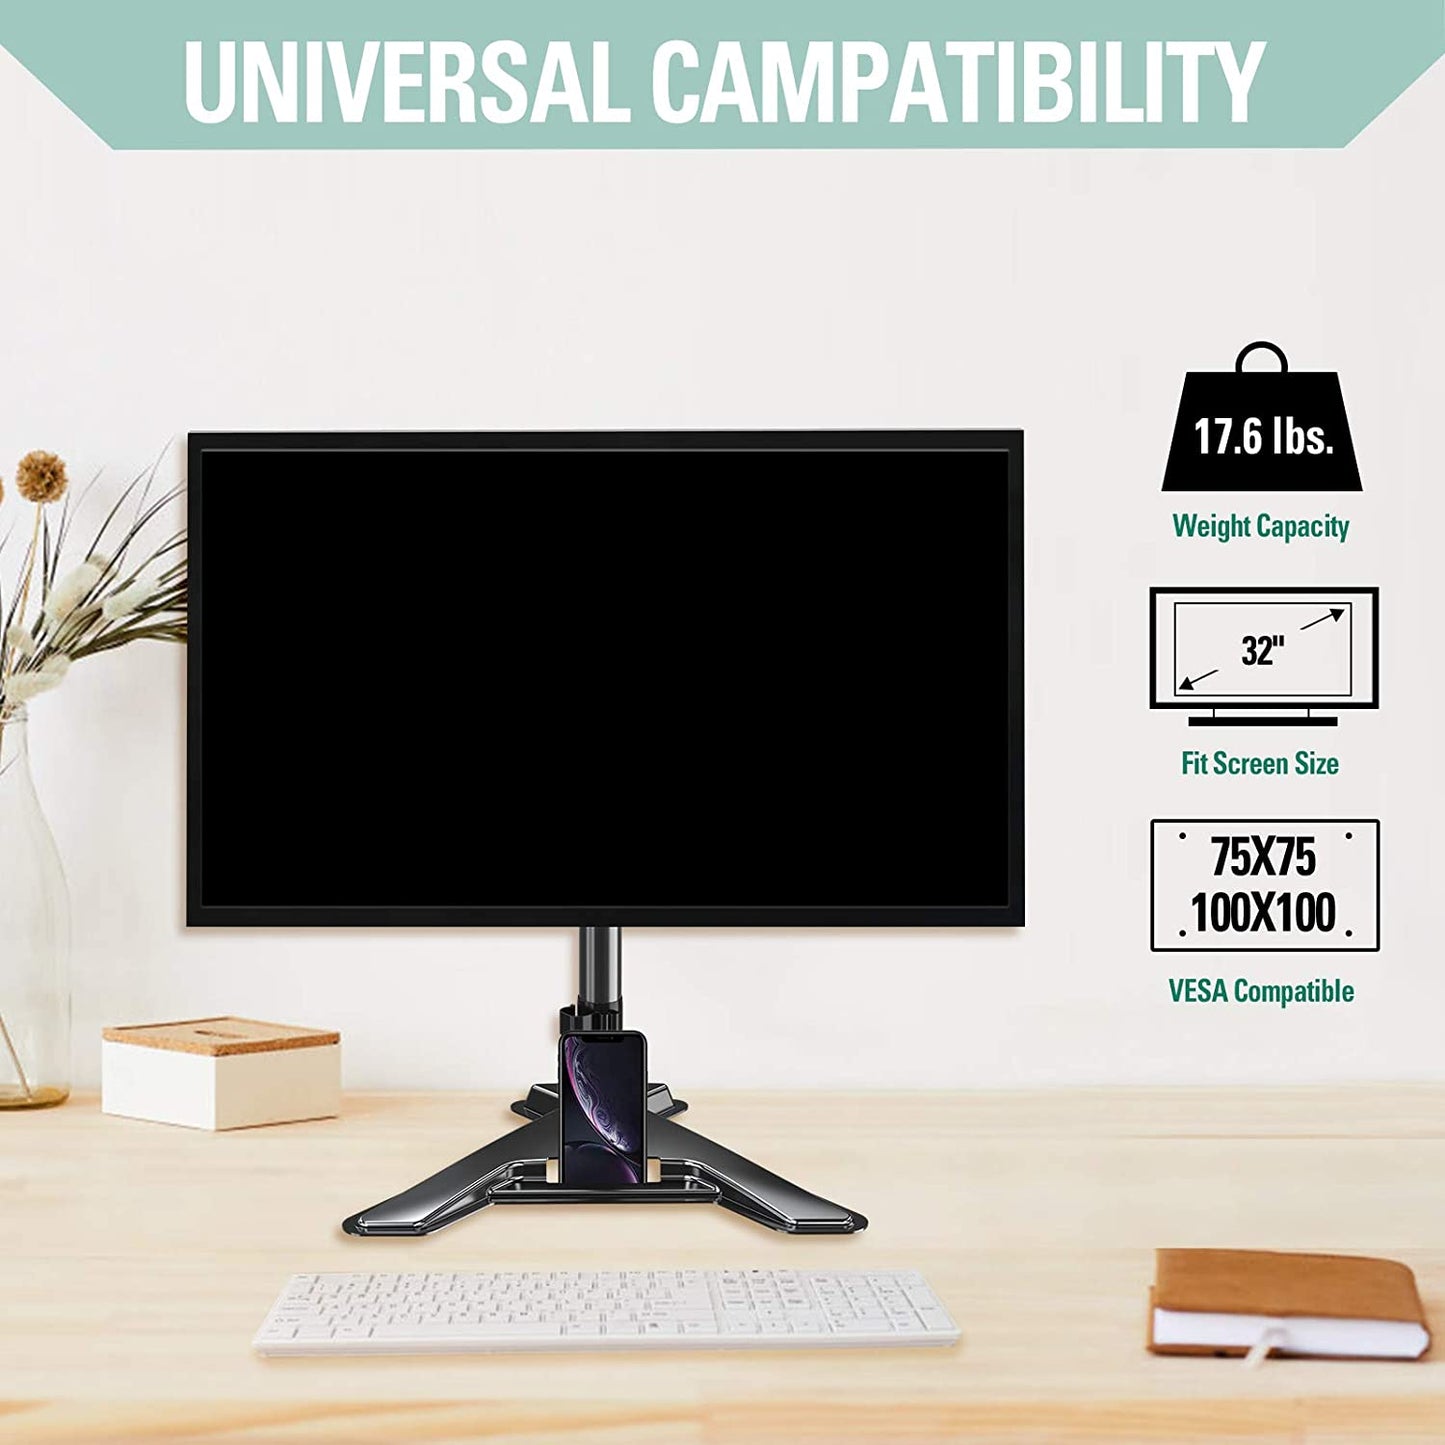 Single Arm computer desk stand for screen up to 32'' supporting up to 17.6 lbs.